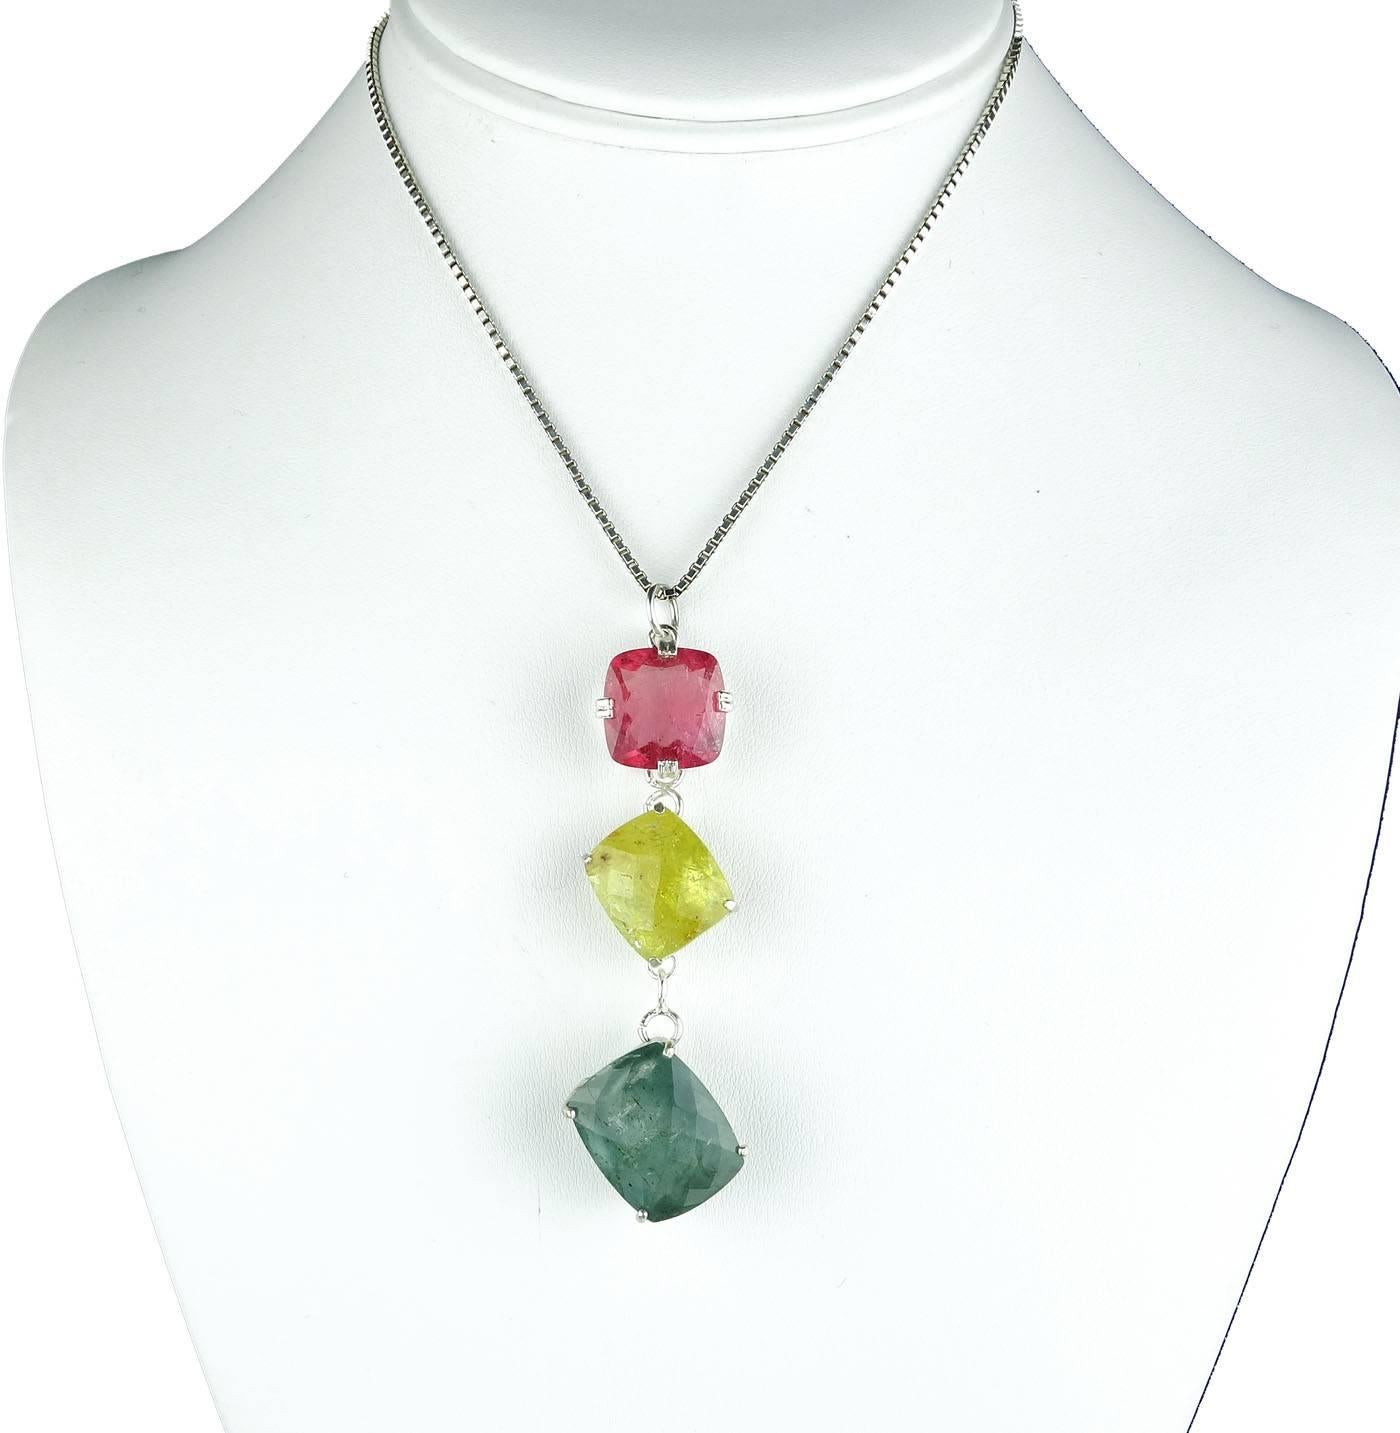 Cushion Cut AJD Stunning 47 Cts of Peachy Pink, Yellow, Bluegreen Tourmaline Silver Pendant For Sale